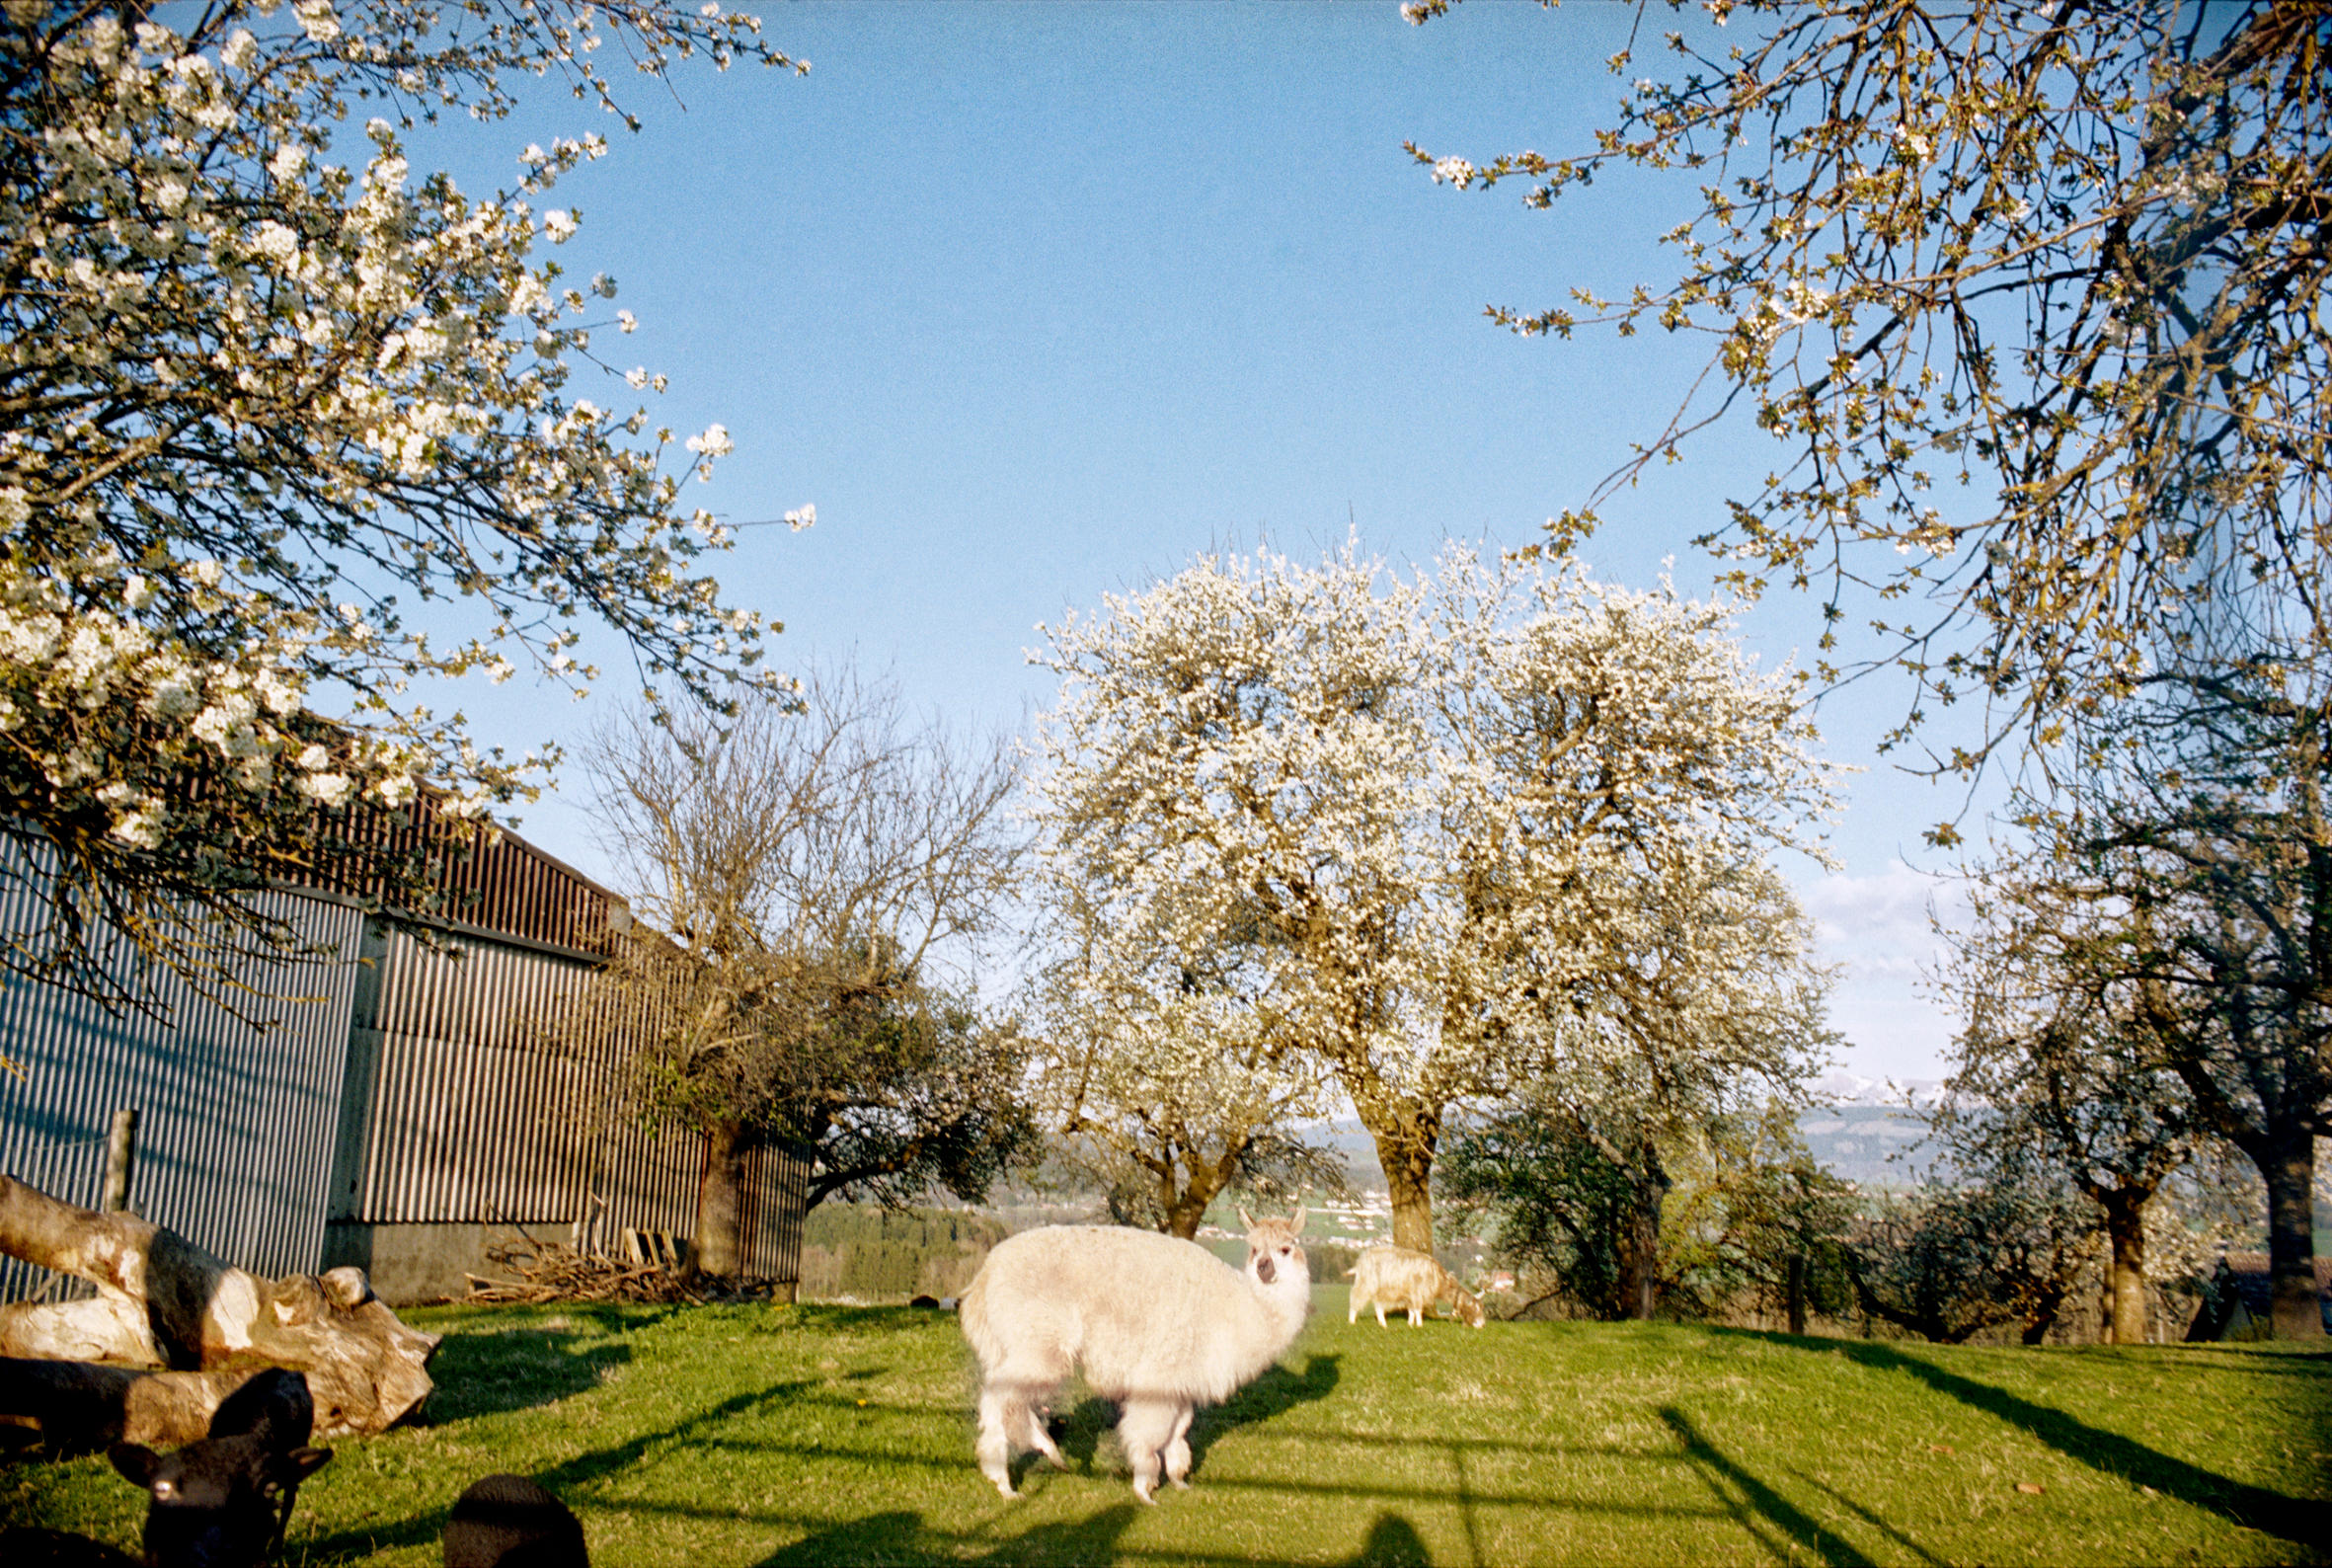 Animals and trees in spring